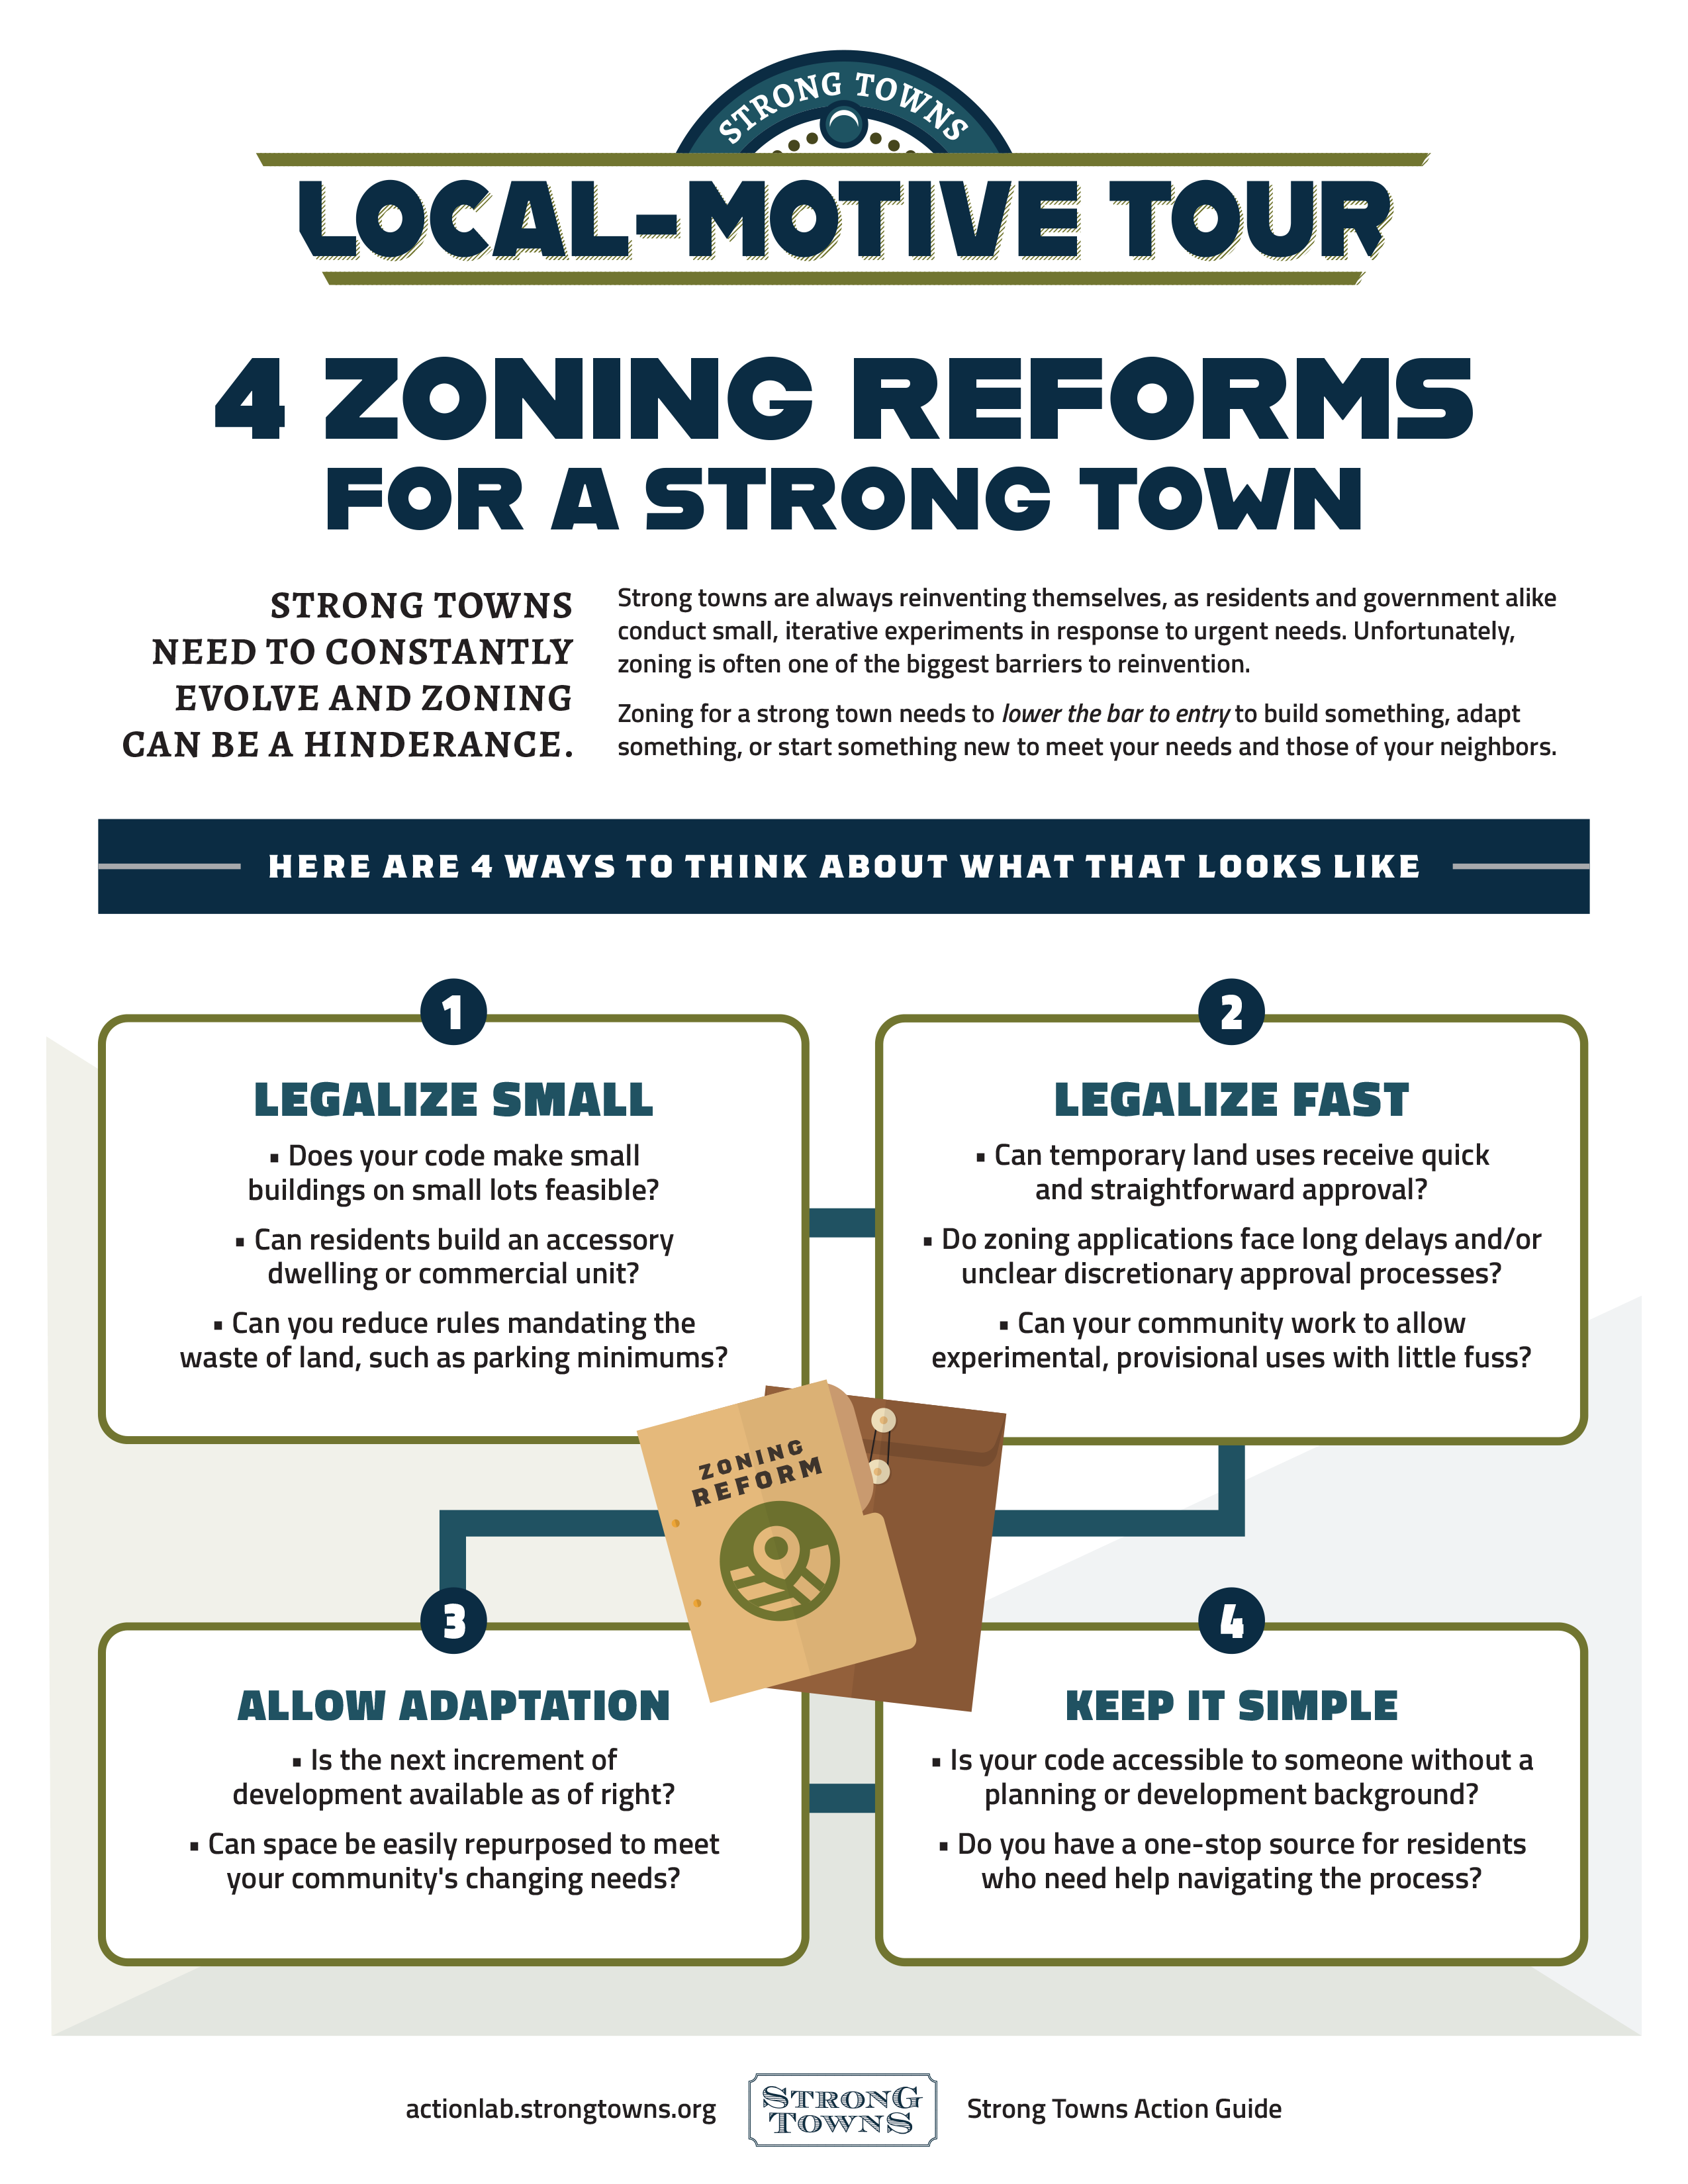 2_Strong-Towns-Action-Guide_4-Zoning-Reforms_copy-1.png